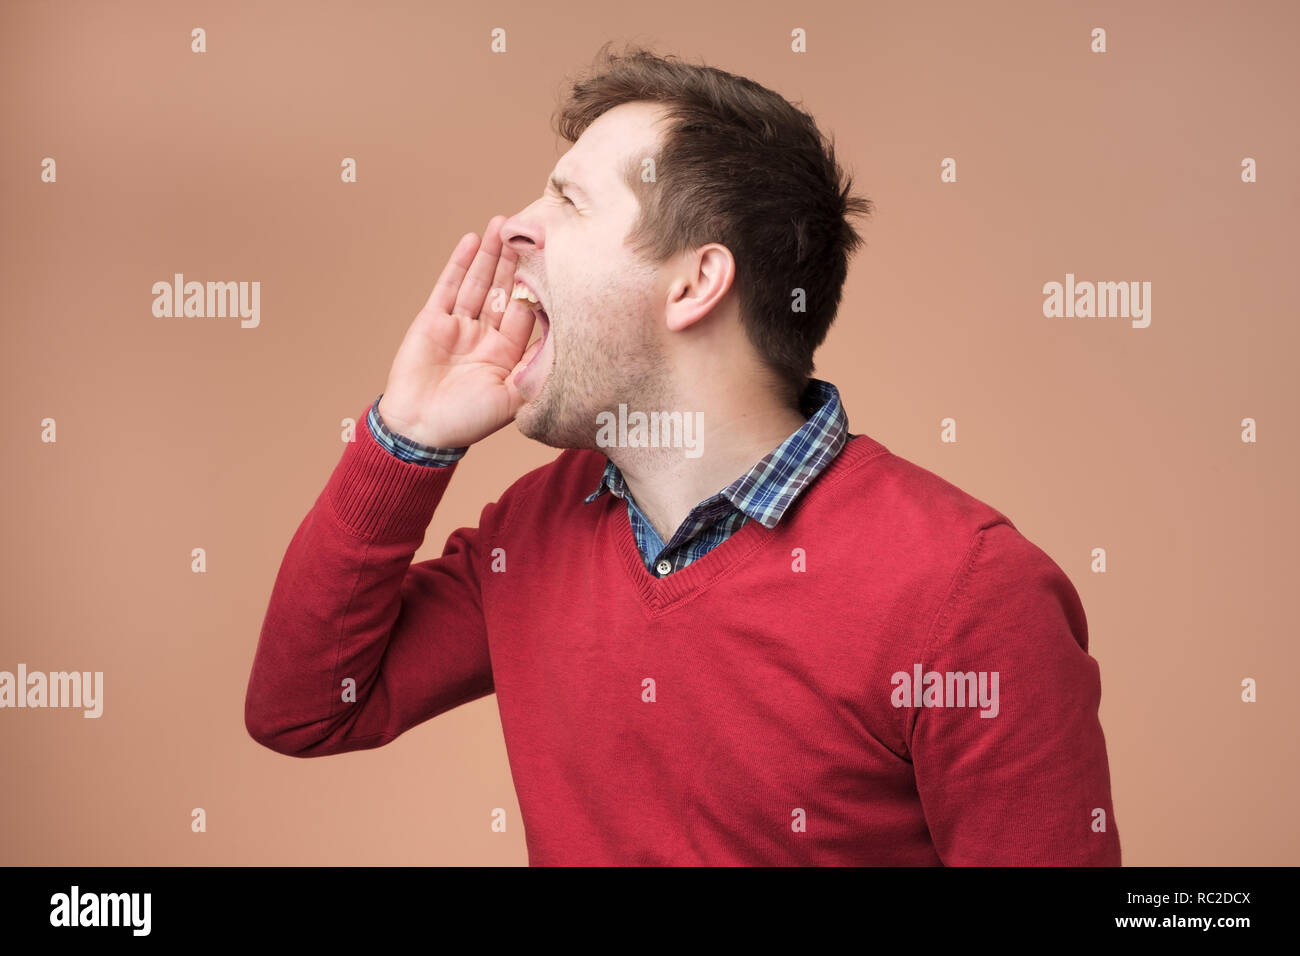 Closeup side view profile, portrait of mad young man, worker, business employee with wide opened mouth, yelling, isolated on brown background. Stock Photo